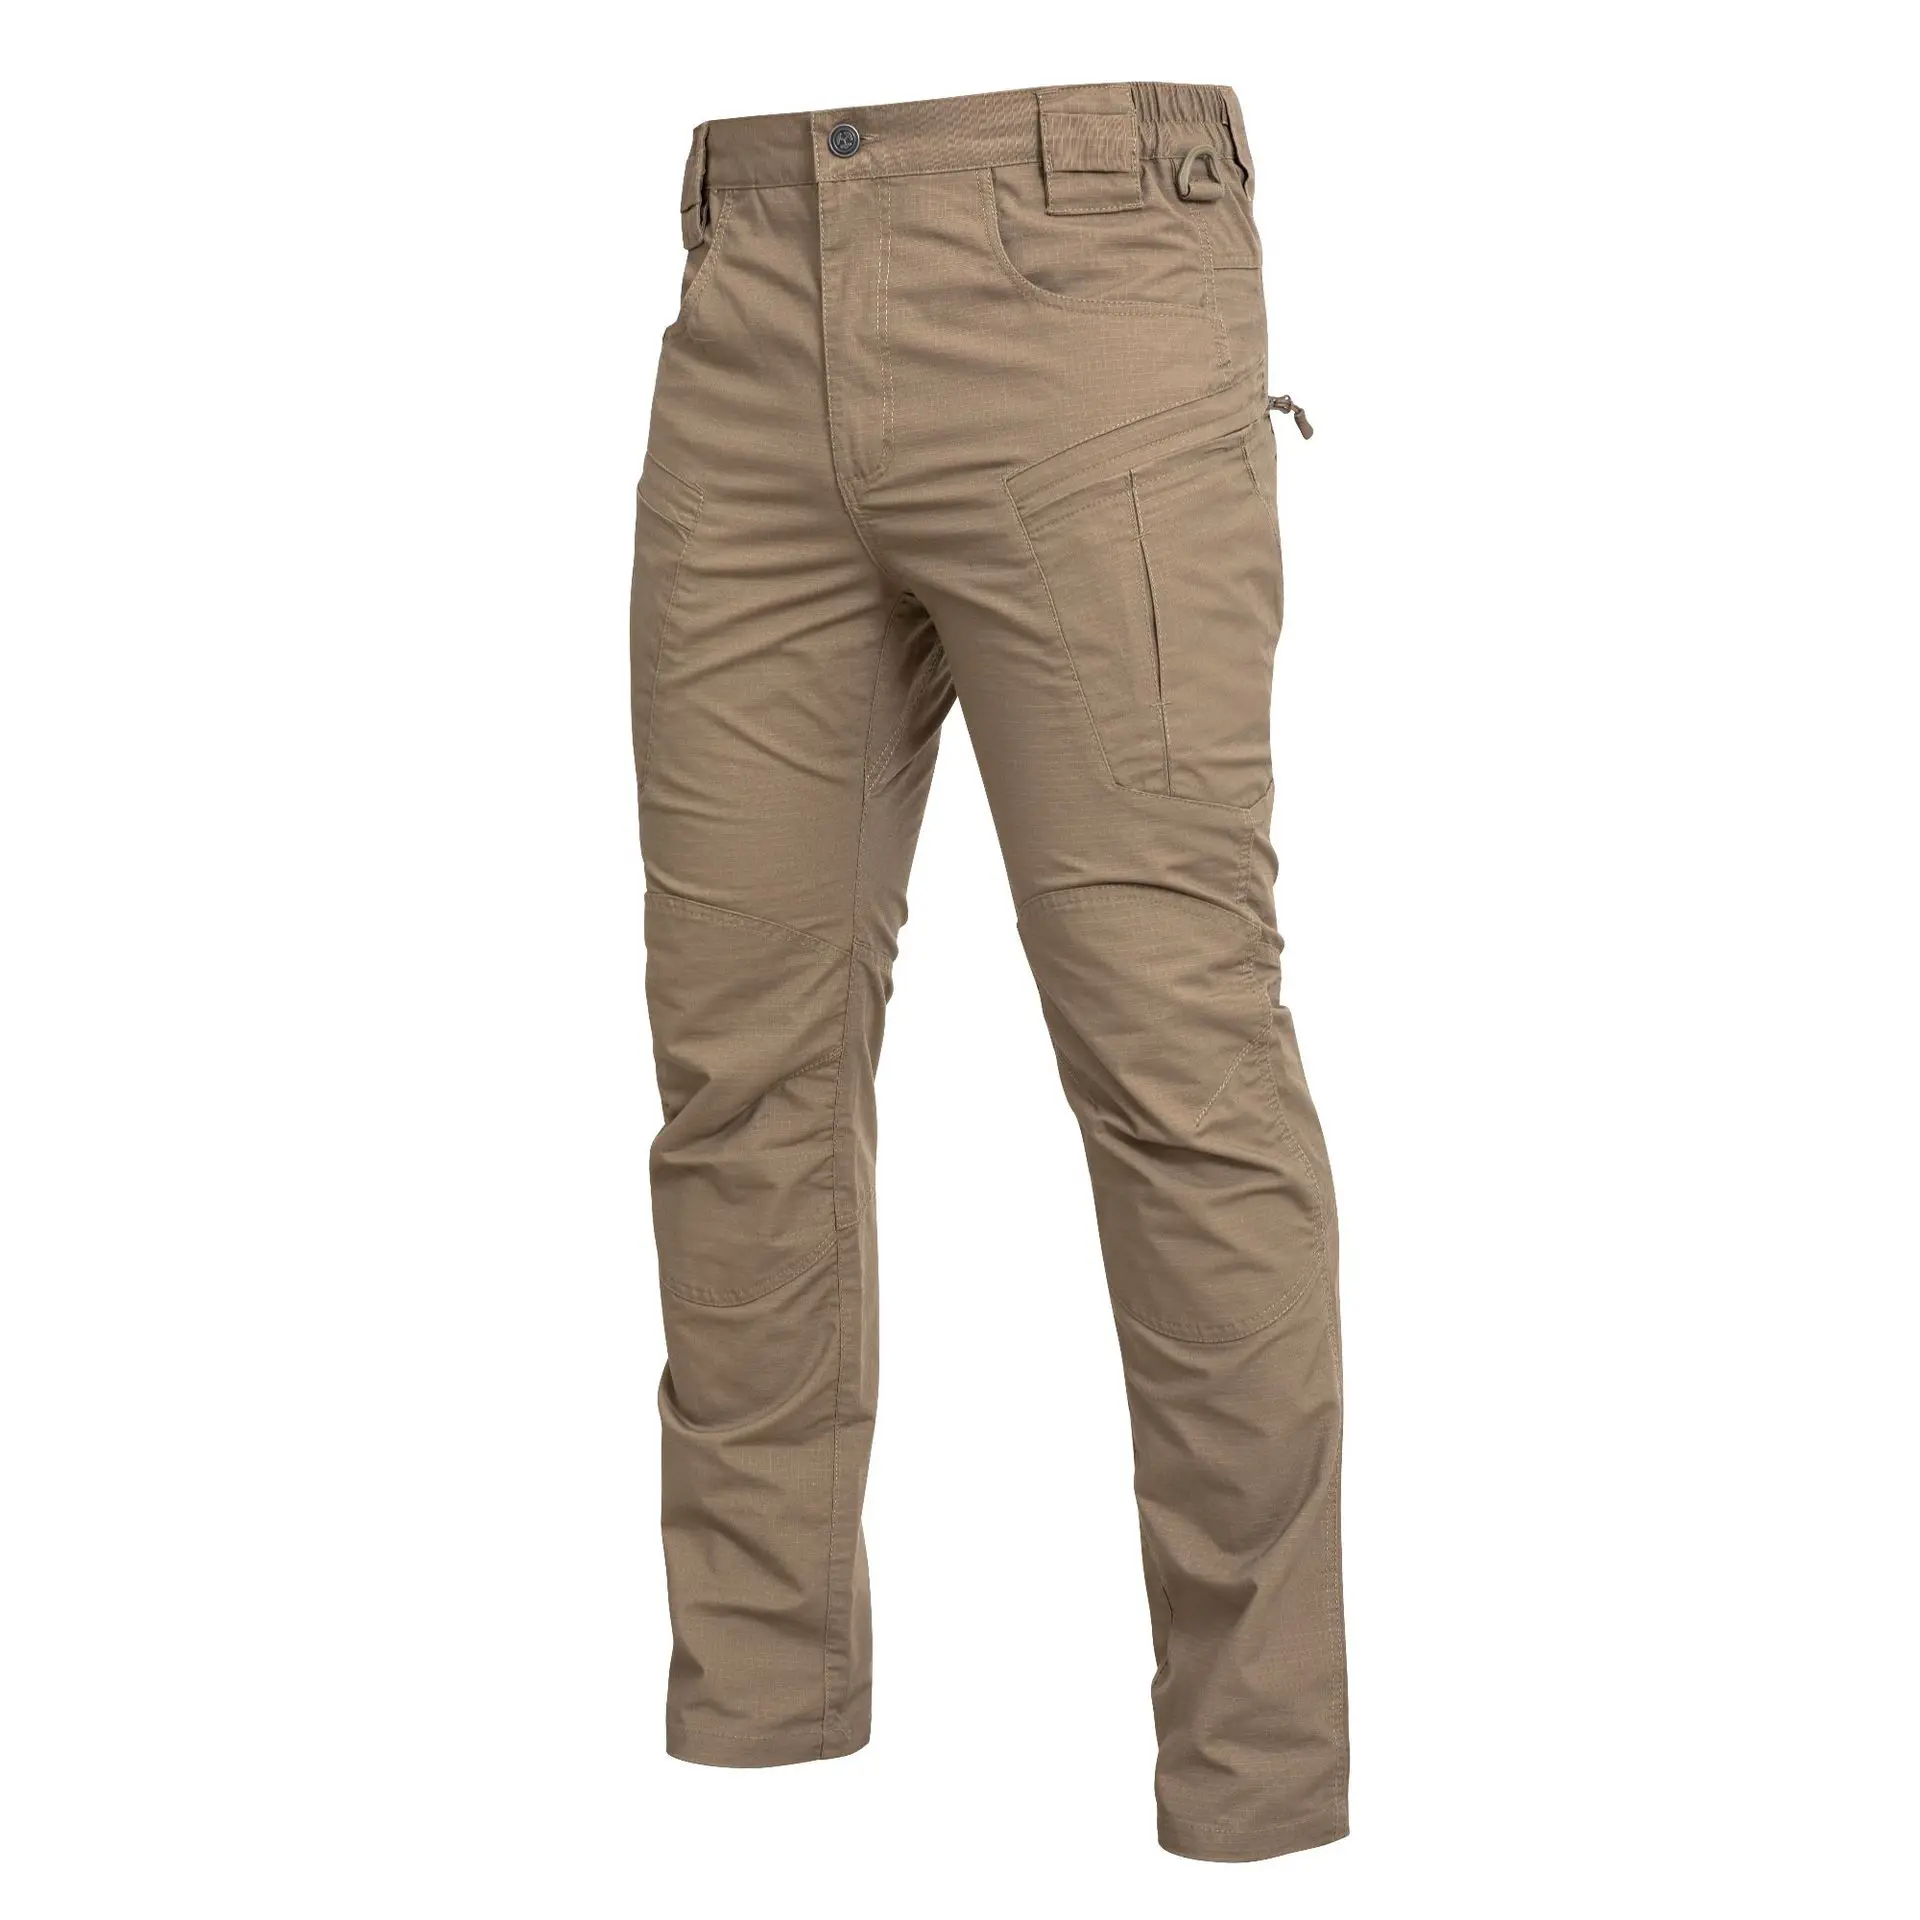 PAVEHAWK IX5 Hiking Pants Mens Cargo Pants Wear Resistant Tactical Pants Outdoor Hunting Mountain Climing Nylon Polyester Women